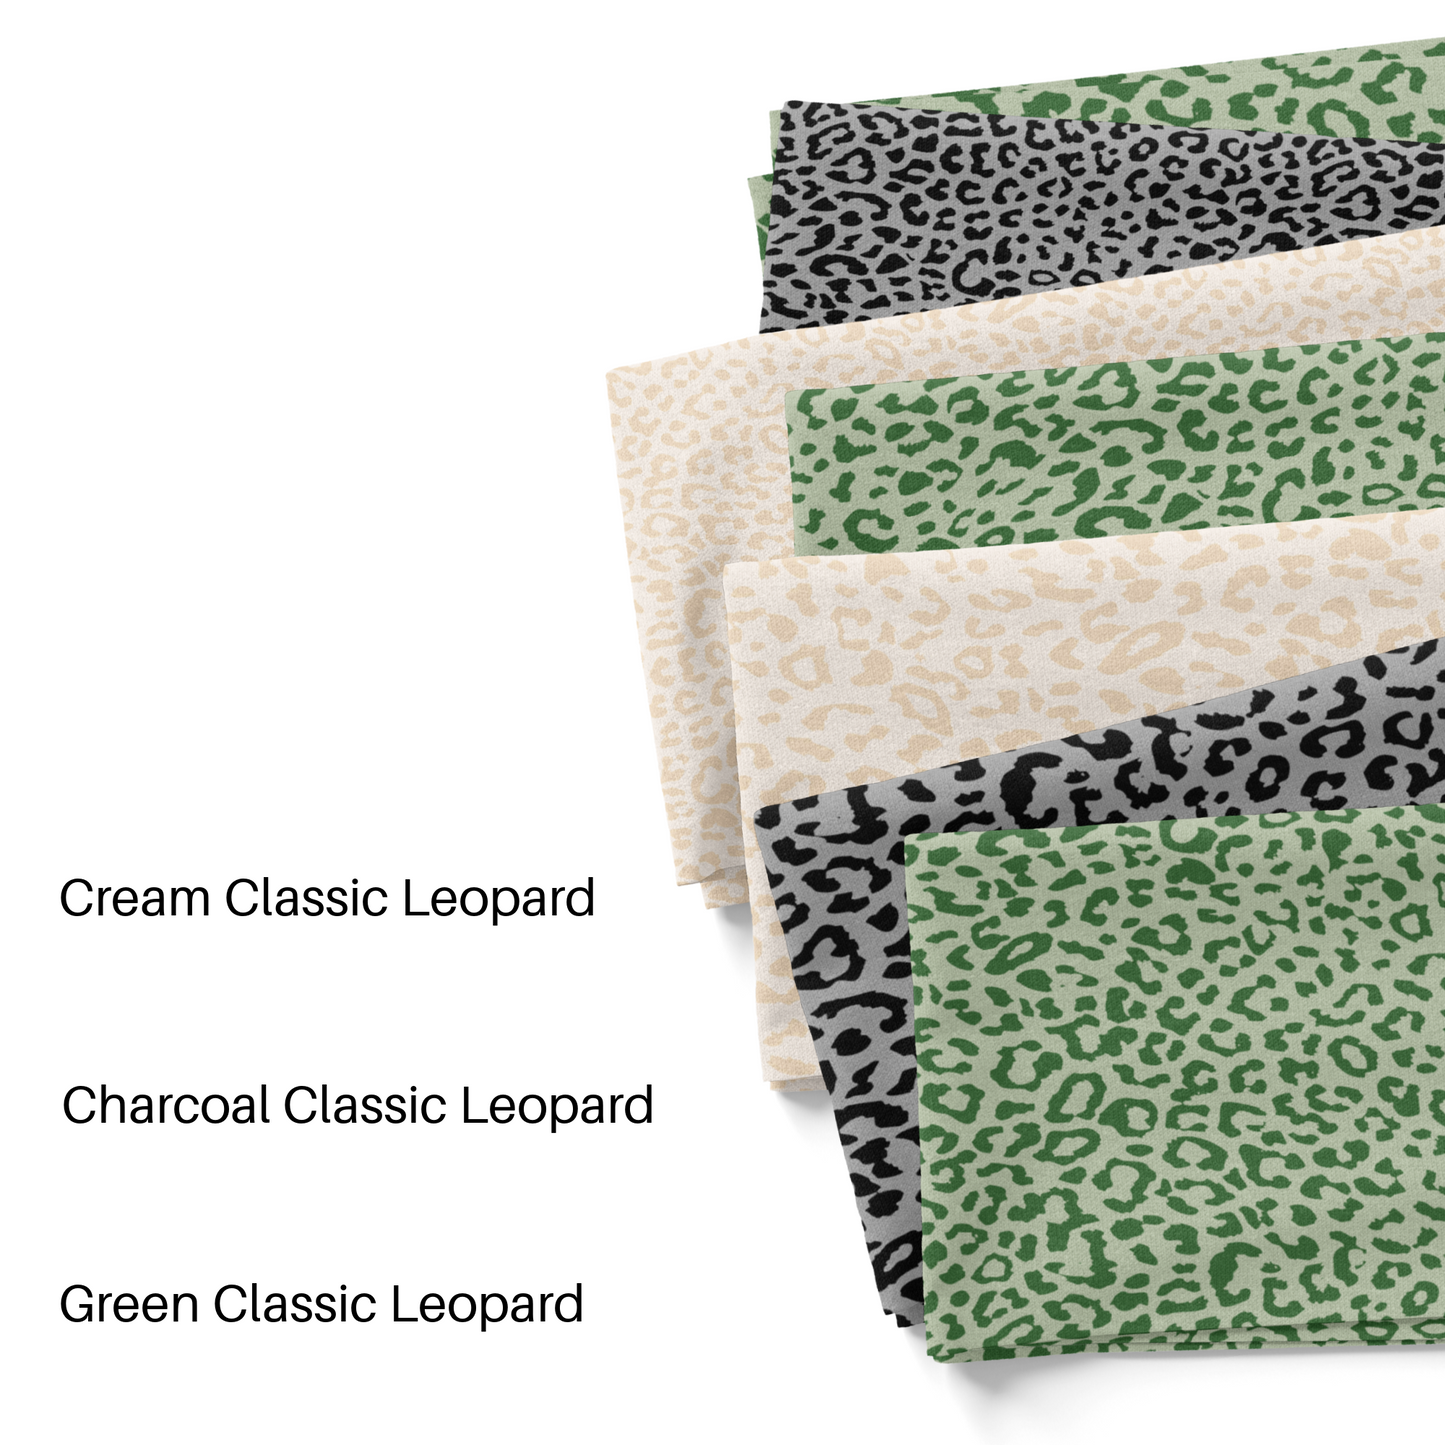 Charcoal Classic Leopard Fabric By The Yard